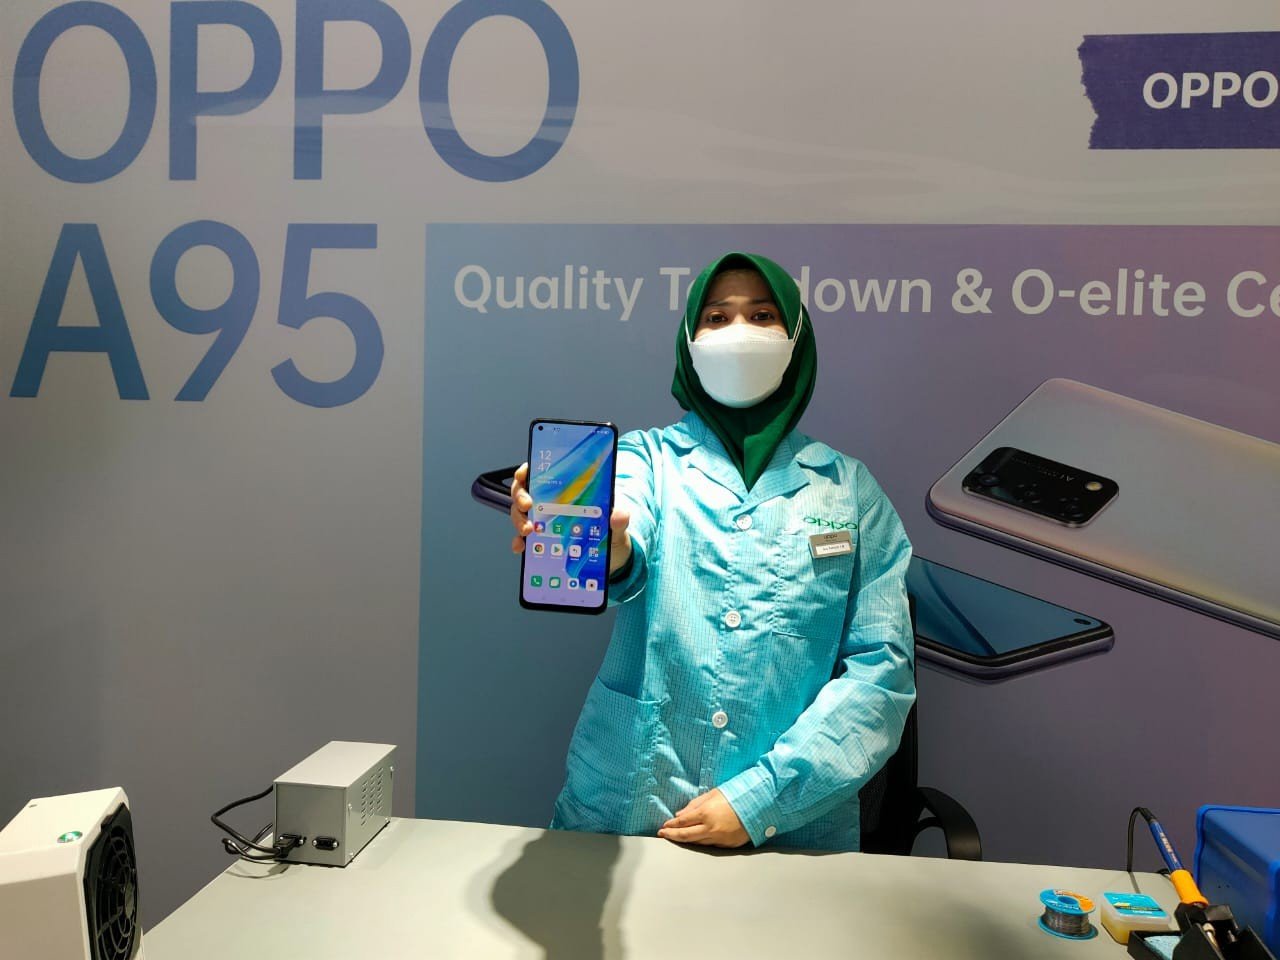 Teknisi OPPO A95 Ayu